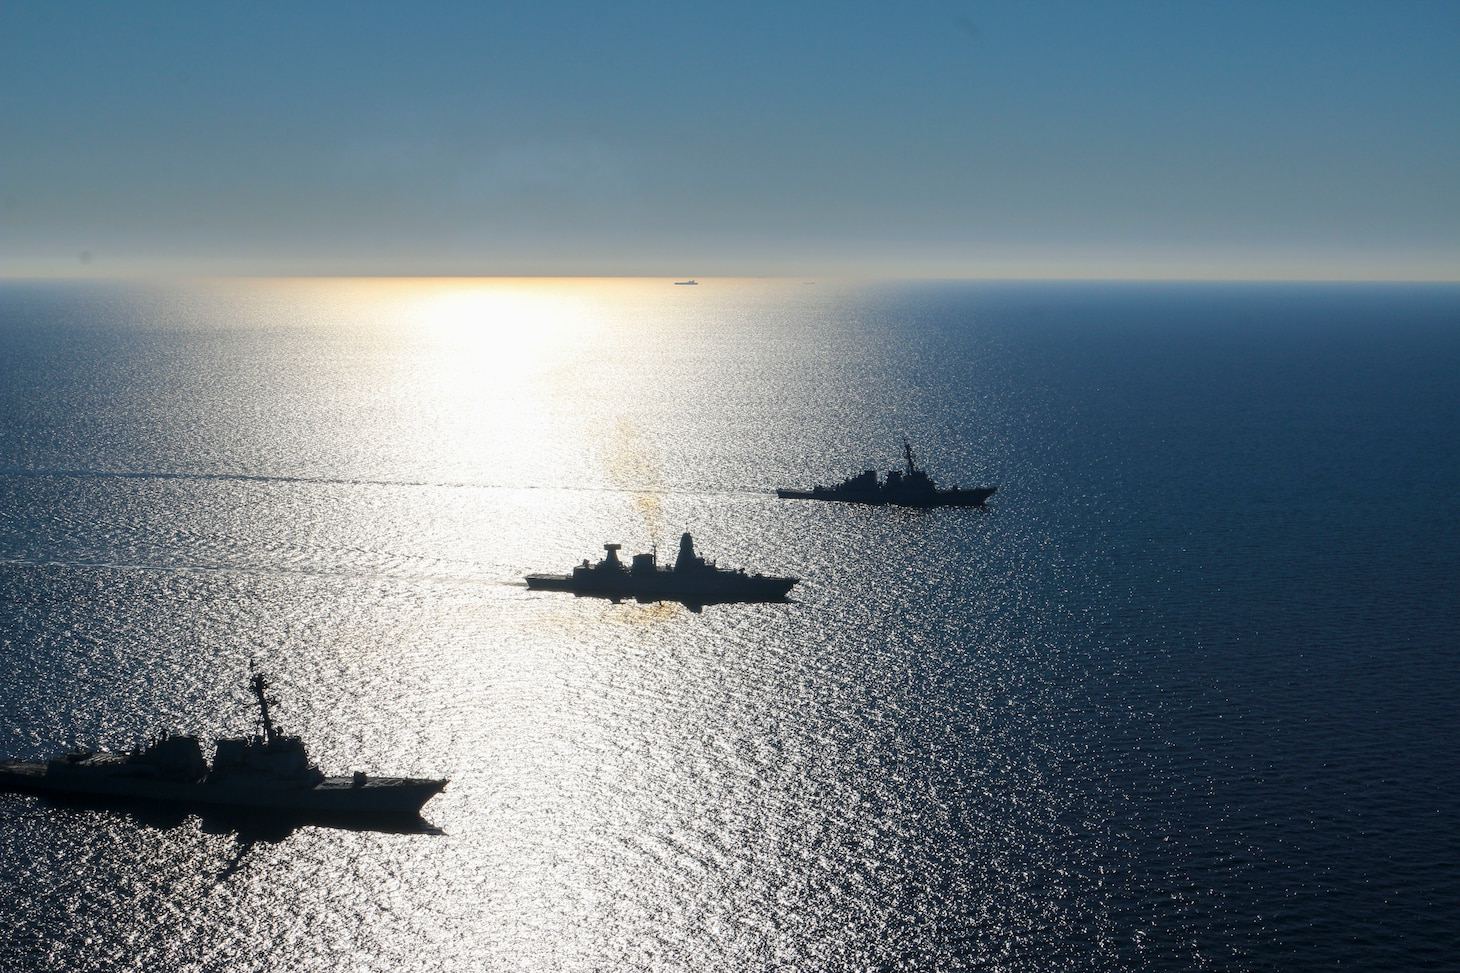 The Arleigh Burke-class guided-missile destroyers USS Forrest Sherman (DDG 98) and USS Donald Cook (DDG 75) conduct maneuvering drills with German Sachsen-class air-defense frigate FGS Sachsen (F219), March 9.